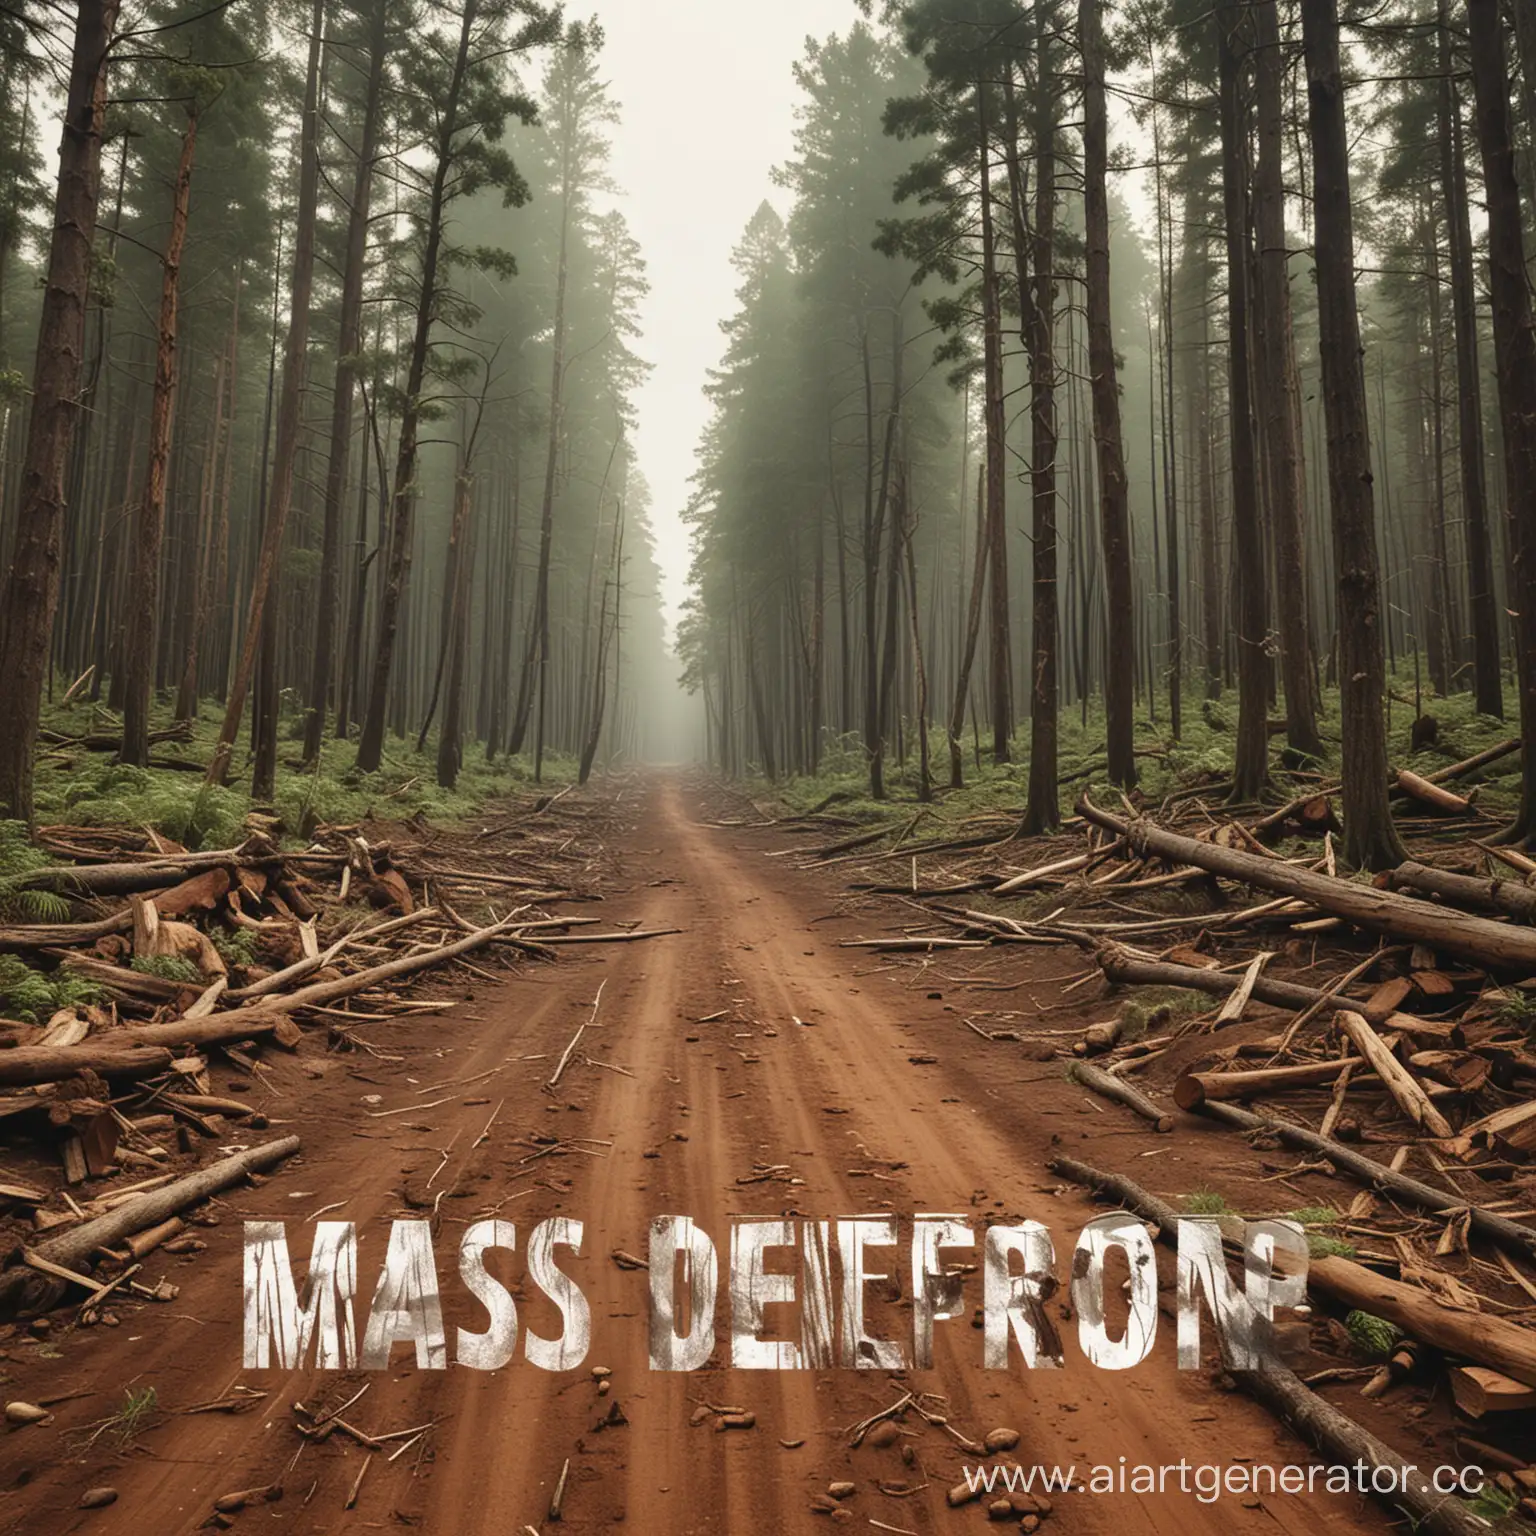 Make a slide picture like in presentations with such prompt: Title Slide: Create a title slide with the title "Mass Deforestation" and include relevant imagery such as a forest being cleared or a globe with trees disappearing.